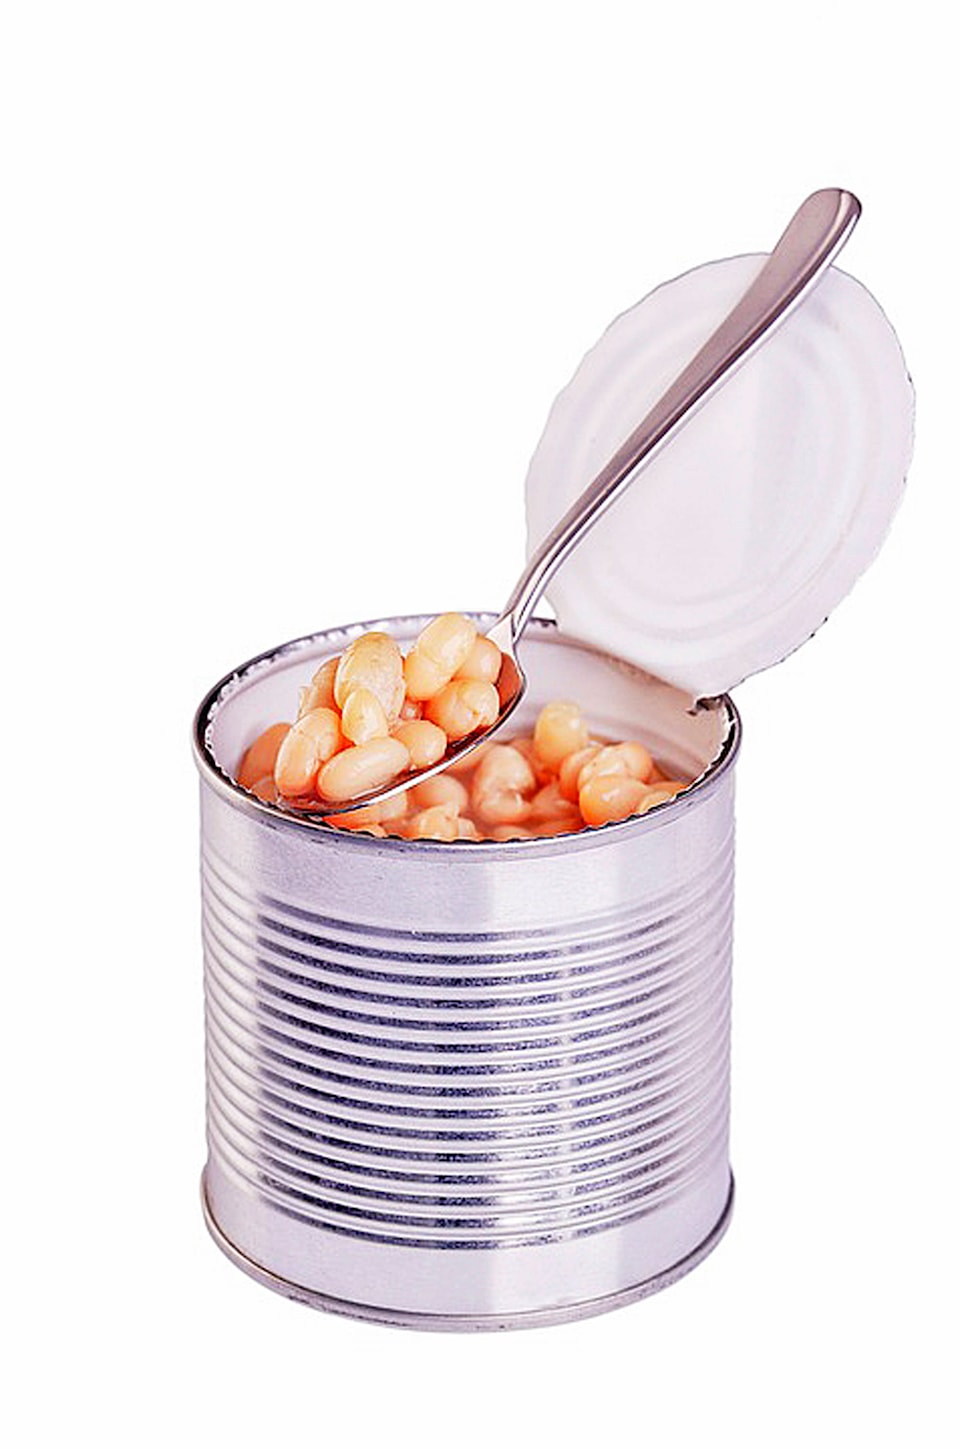 21242322_web1_200415-SAA-Can-of-beans